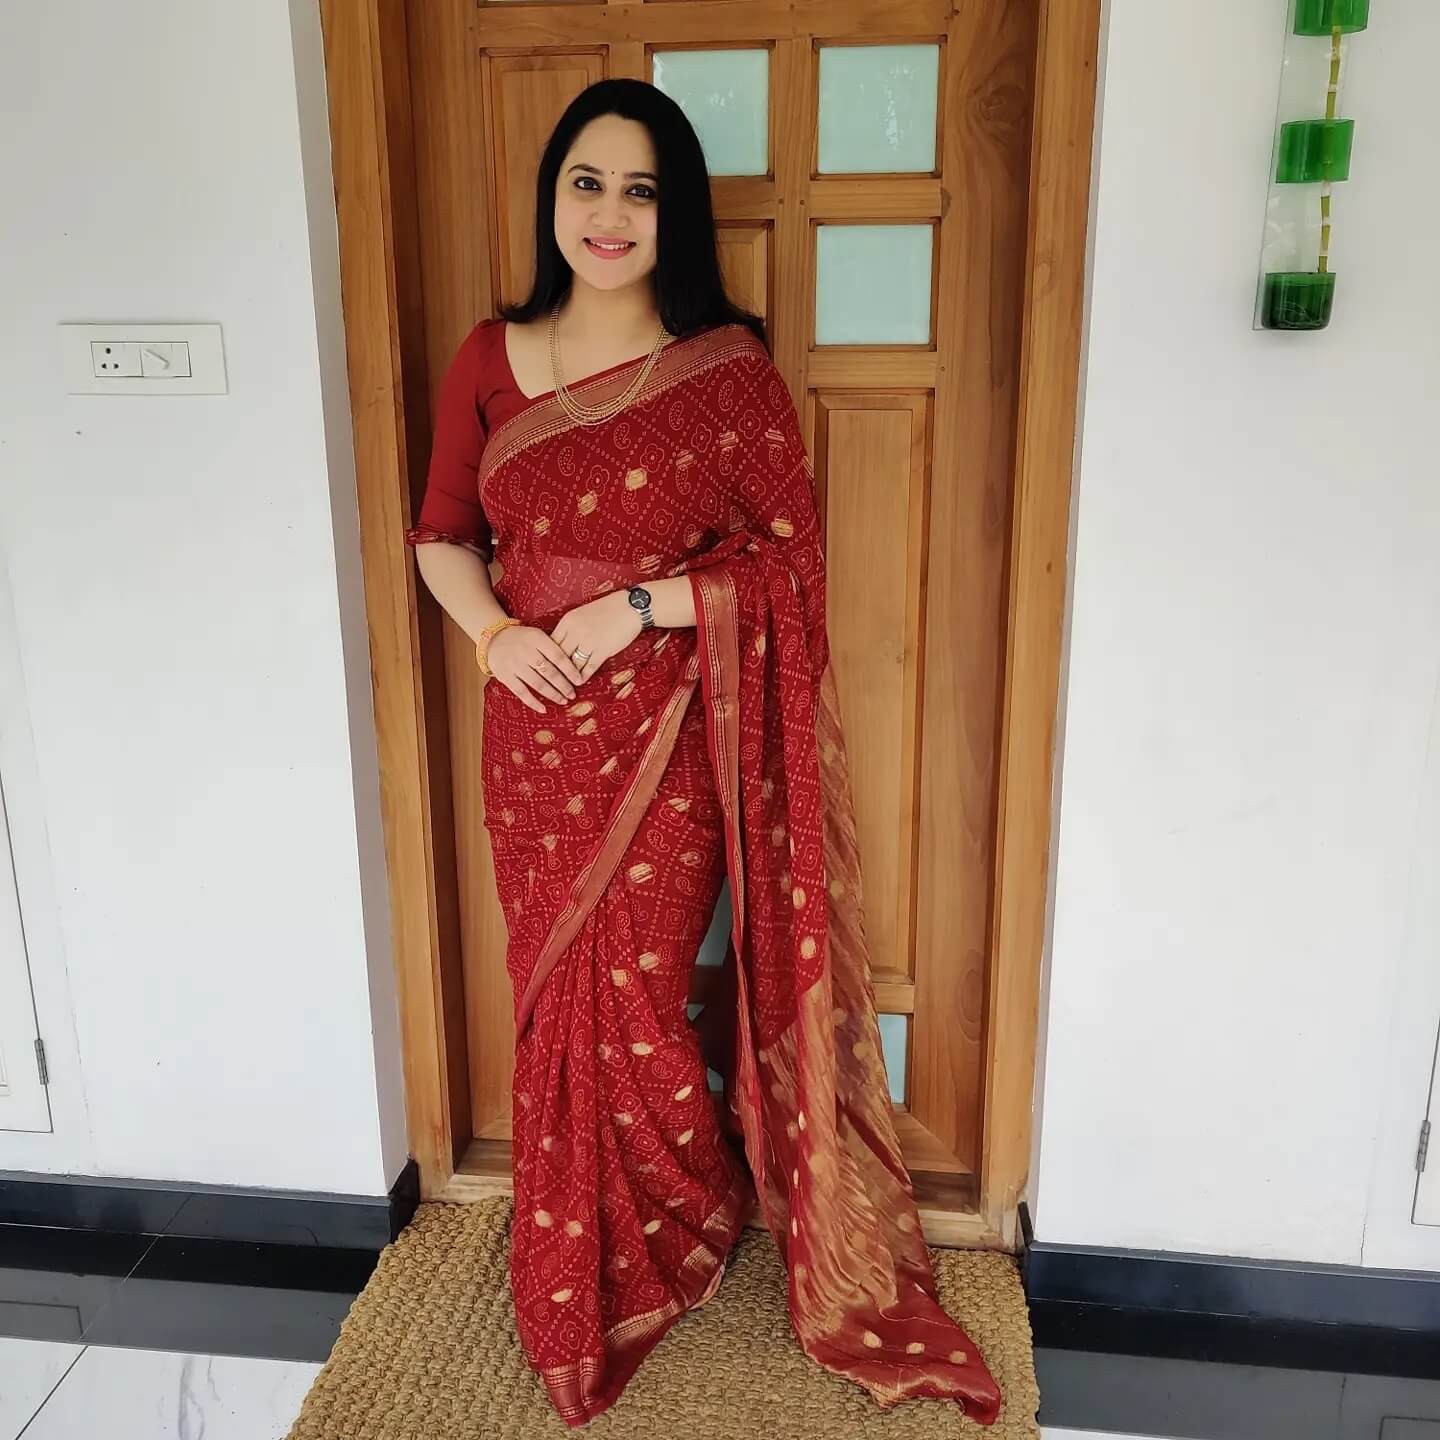 South Beauty Miya George In Red Bandhani Saree Paired With Red Solid Blouse Traditional & Western Looks